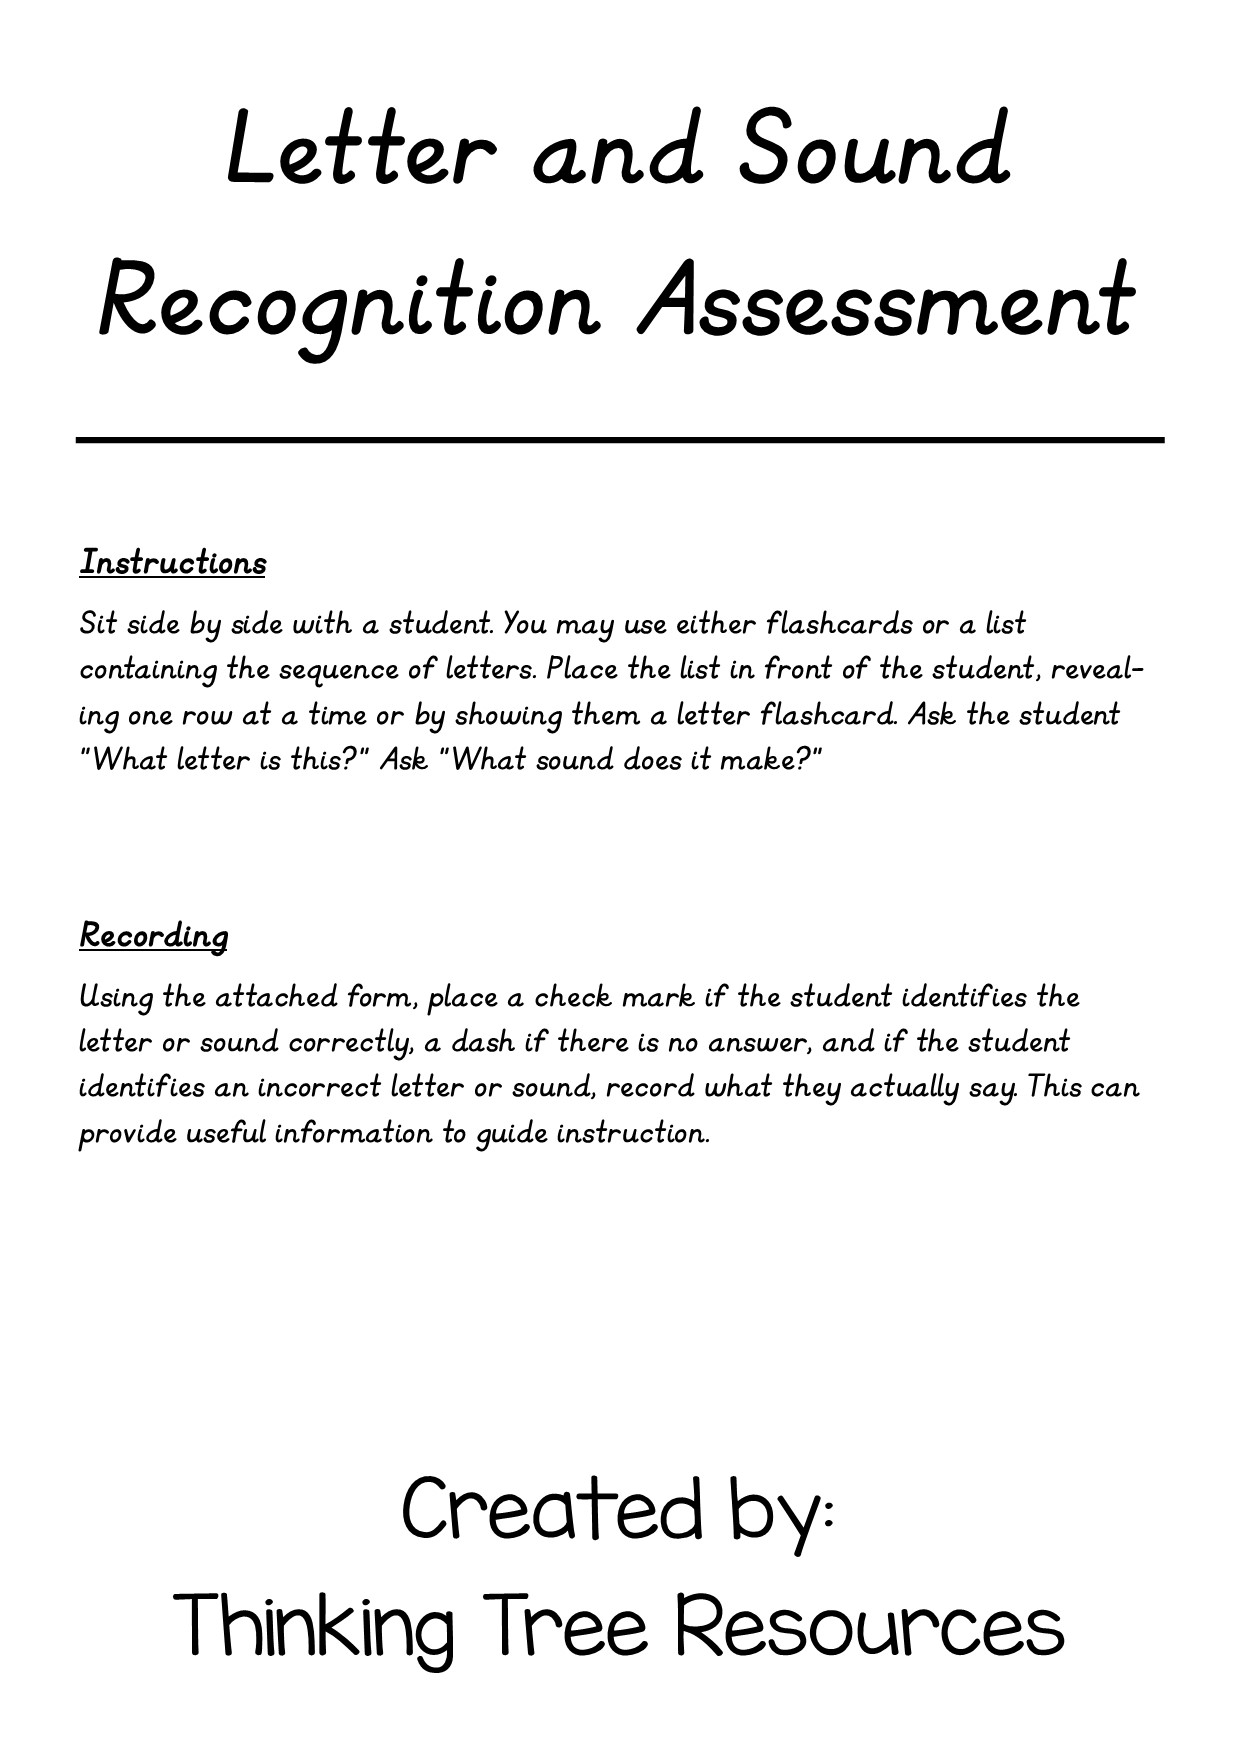 Letter and Sound Recognition Assessment